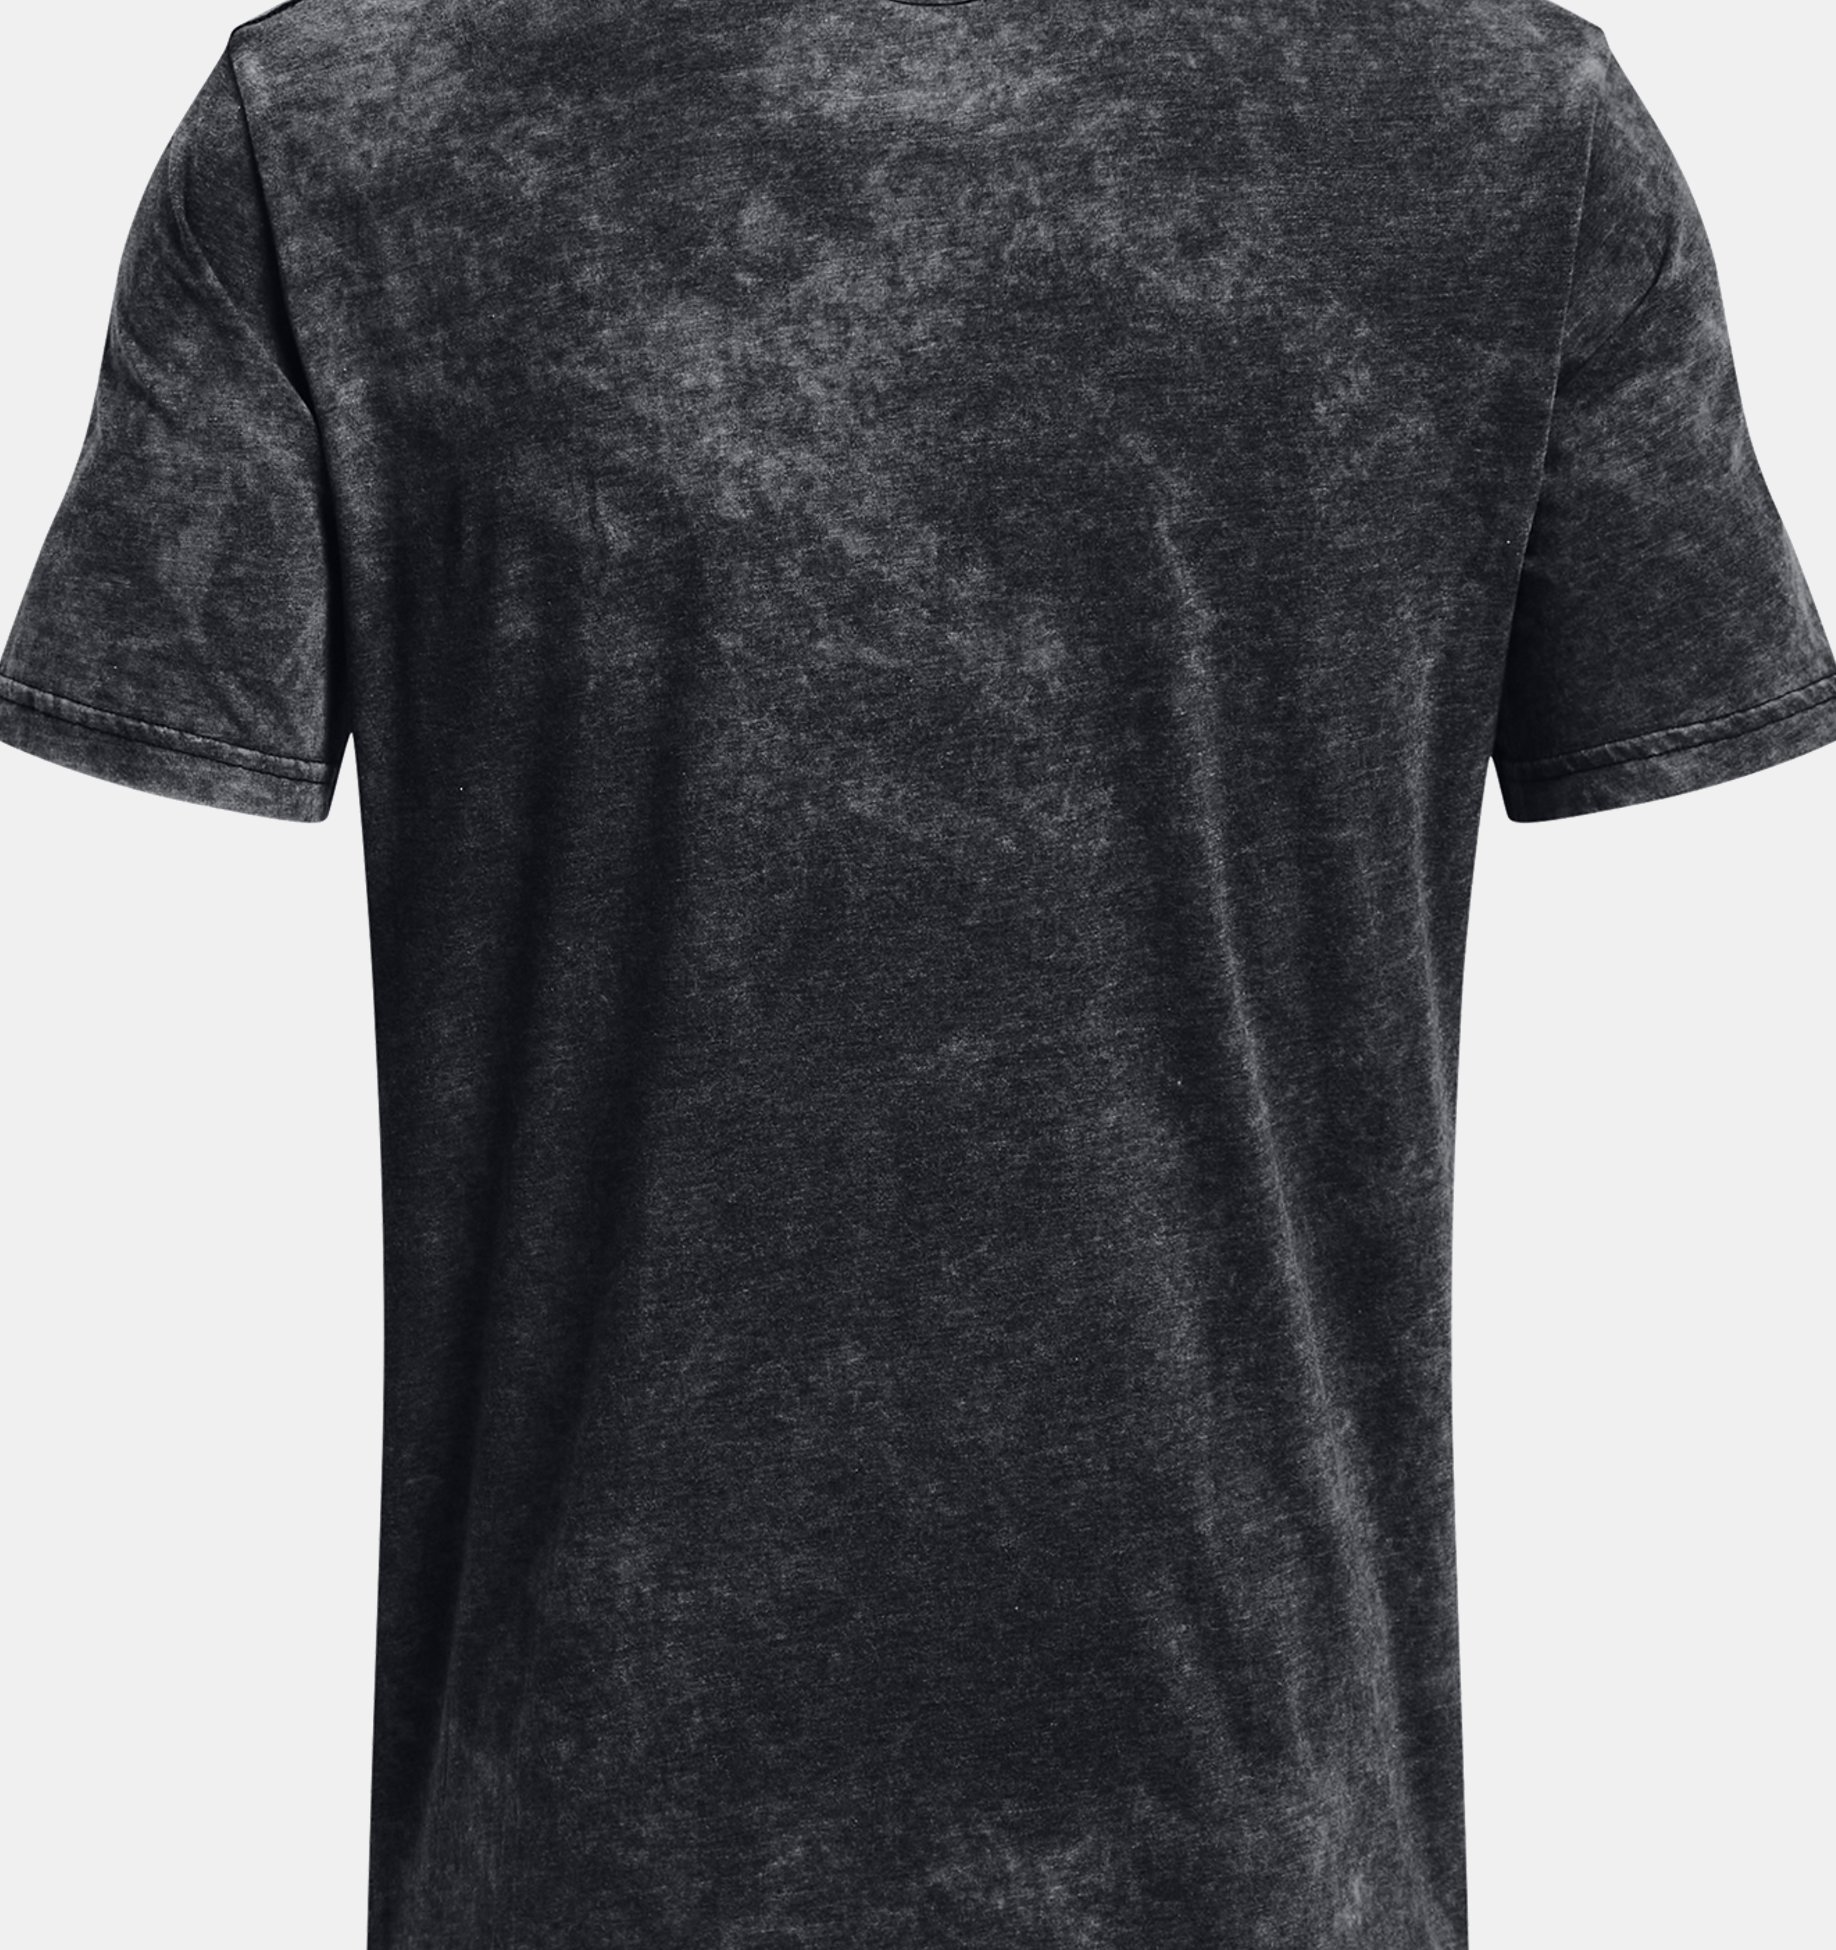 Under Armour Men's UA Elevated Core Wash Short Sleeve - 1379552